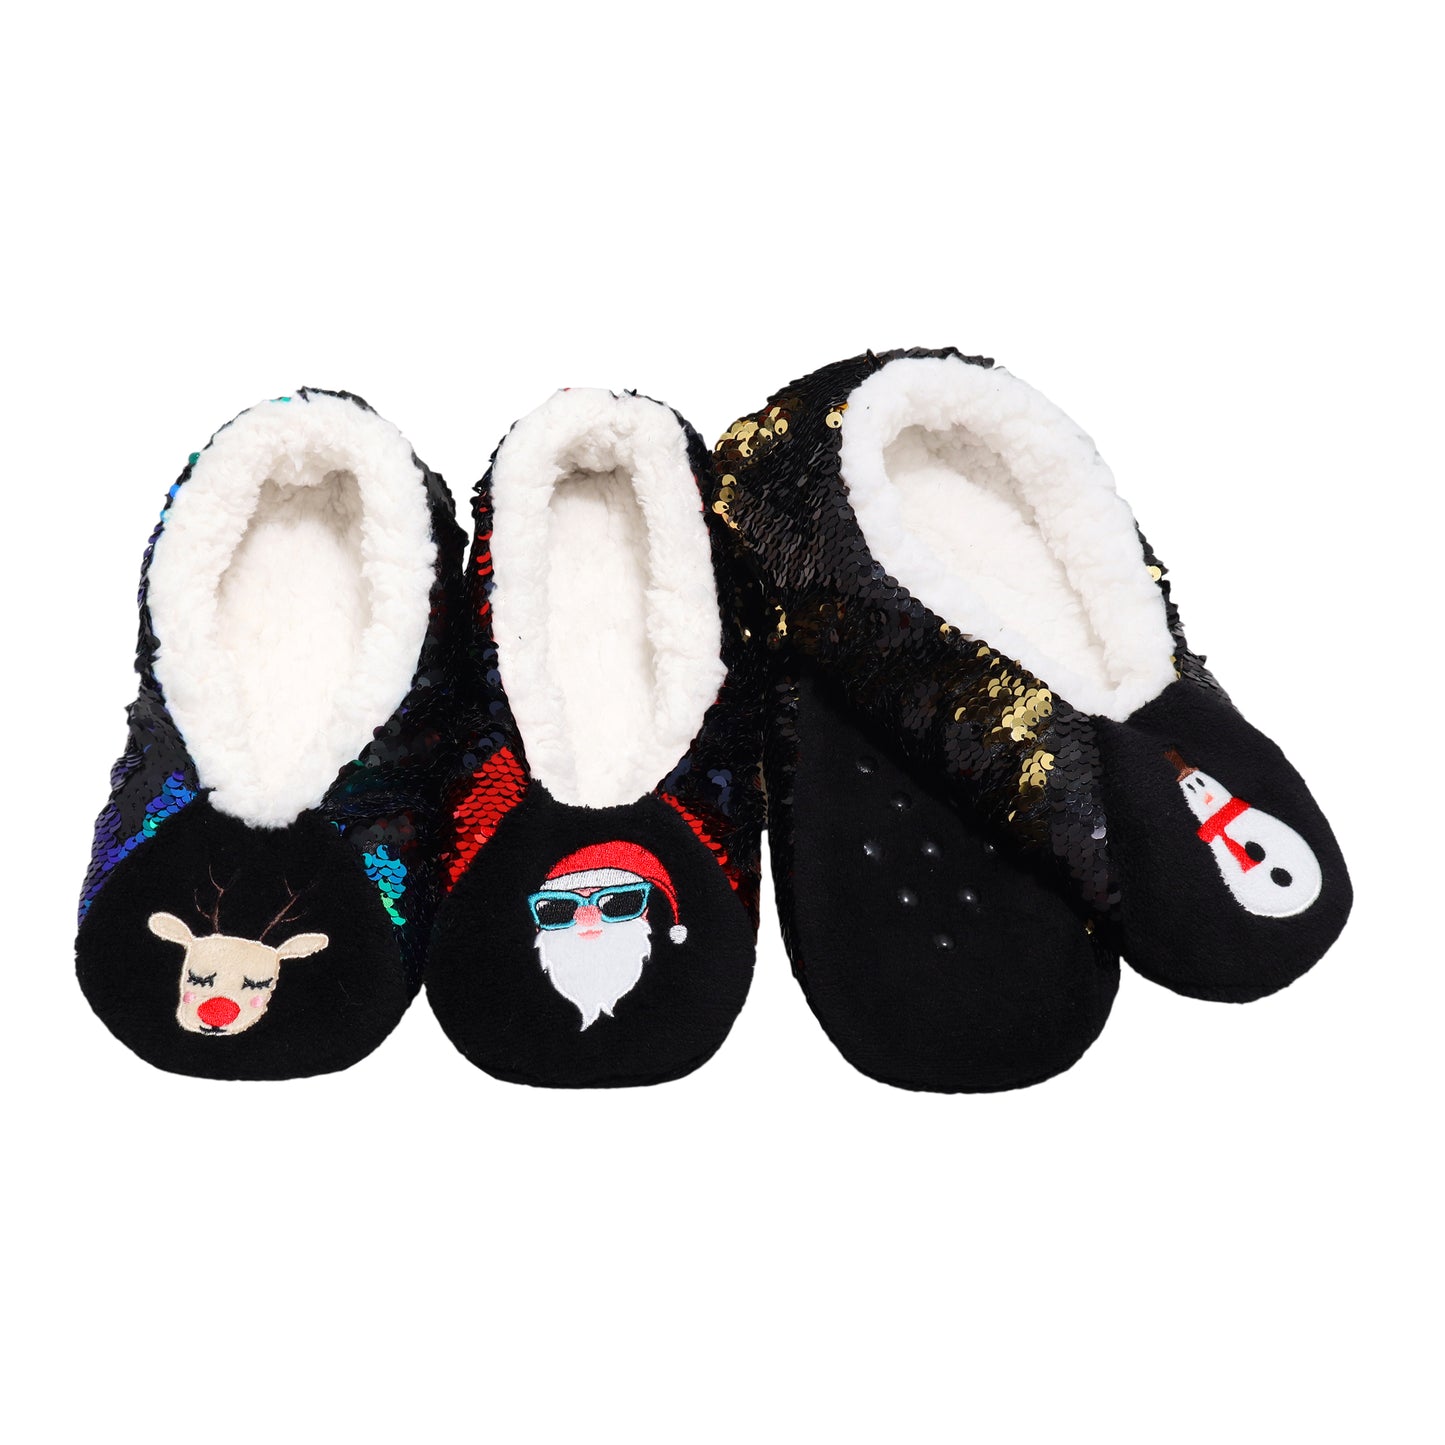 Angelina Winter-Weight Sherpa-Lined Reversible Sequin Slipper Socks (3-Pairs), #WF1918